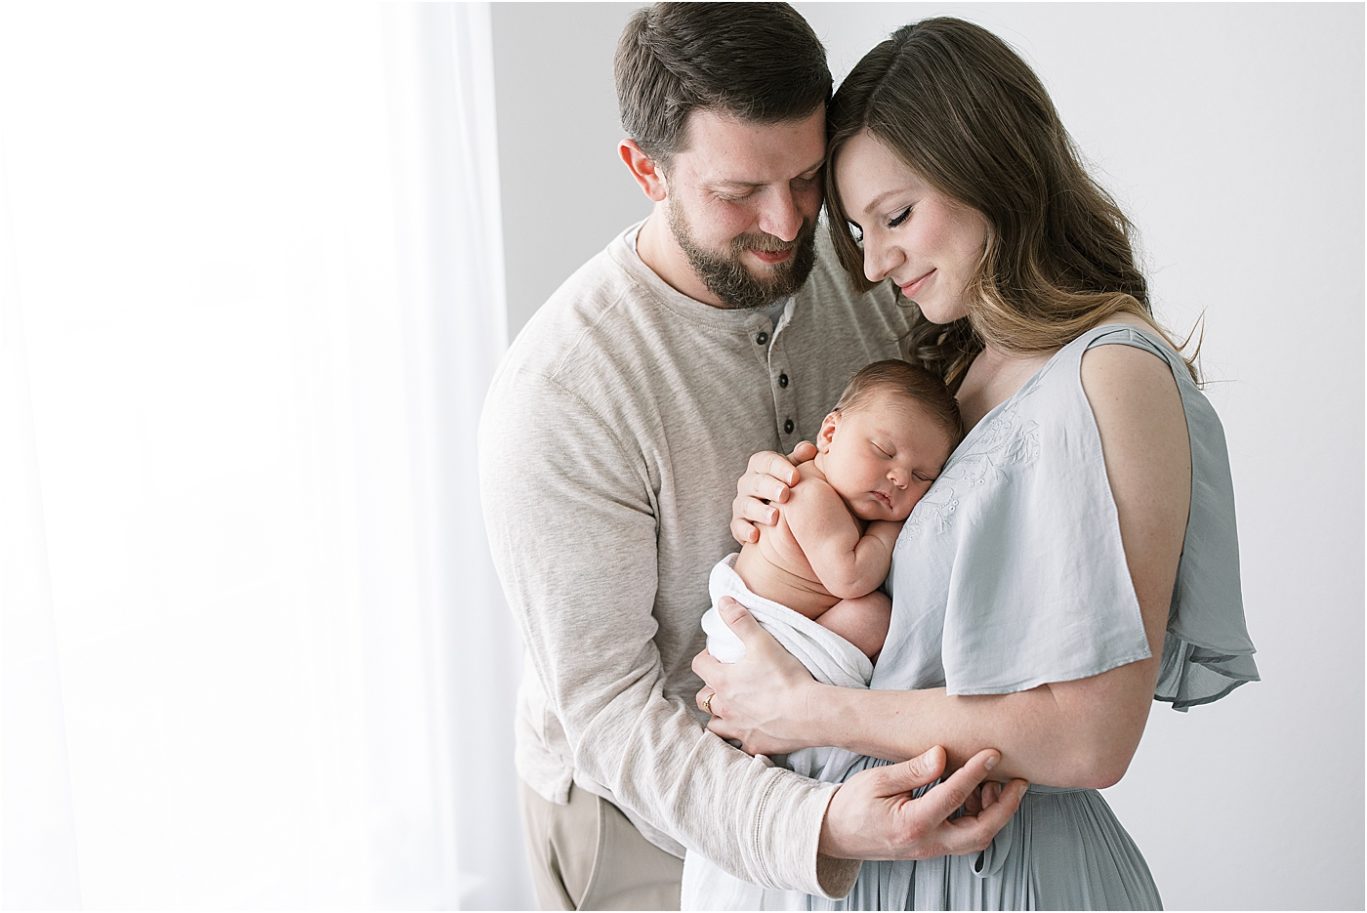 Family portrait during newborn session. Photo by Lindsay Konopa Photography.